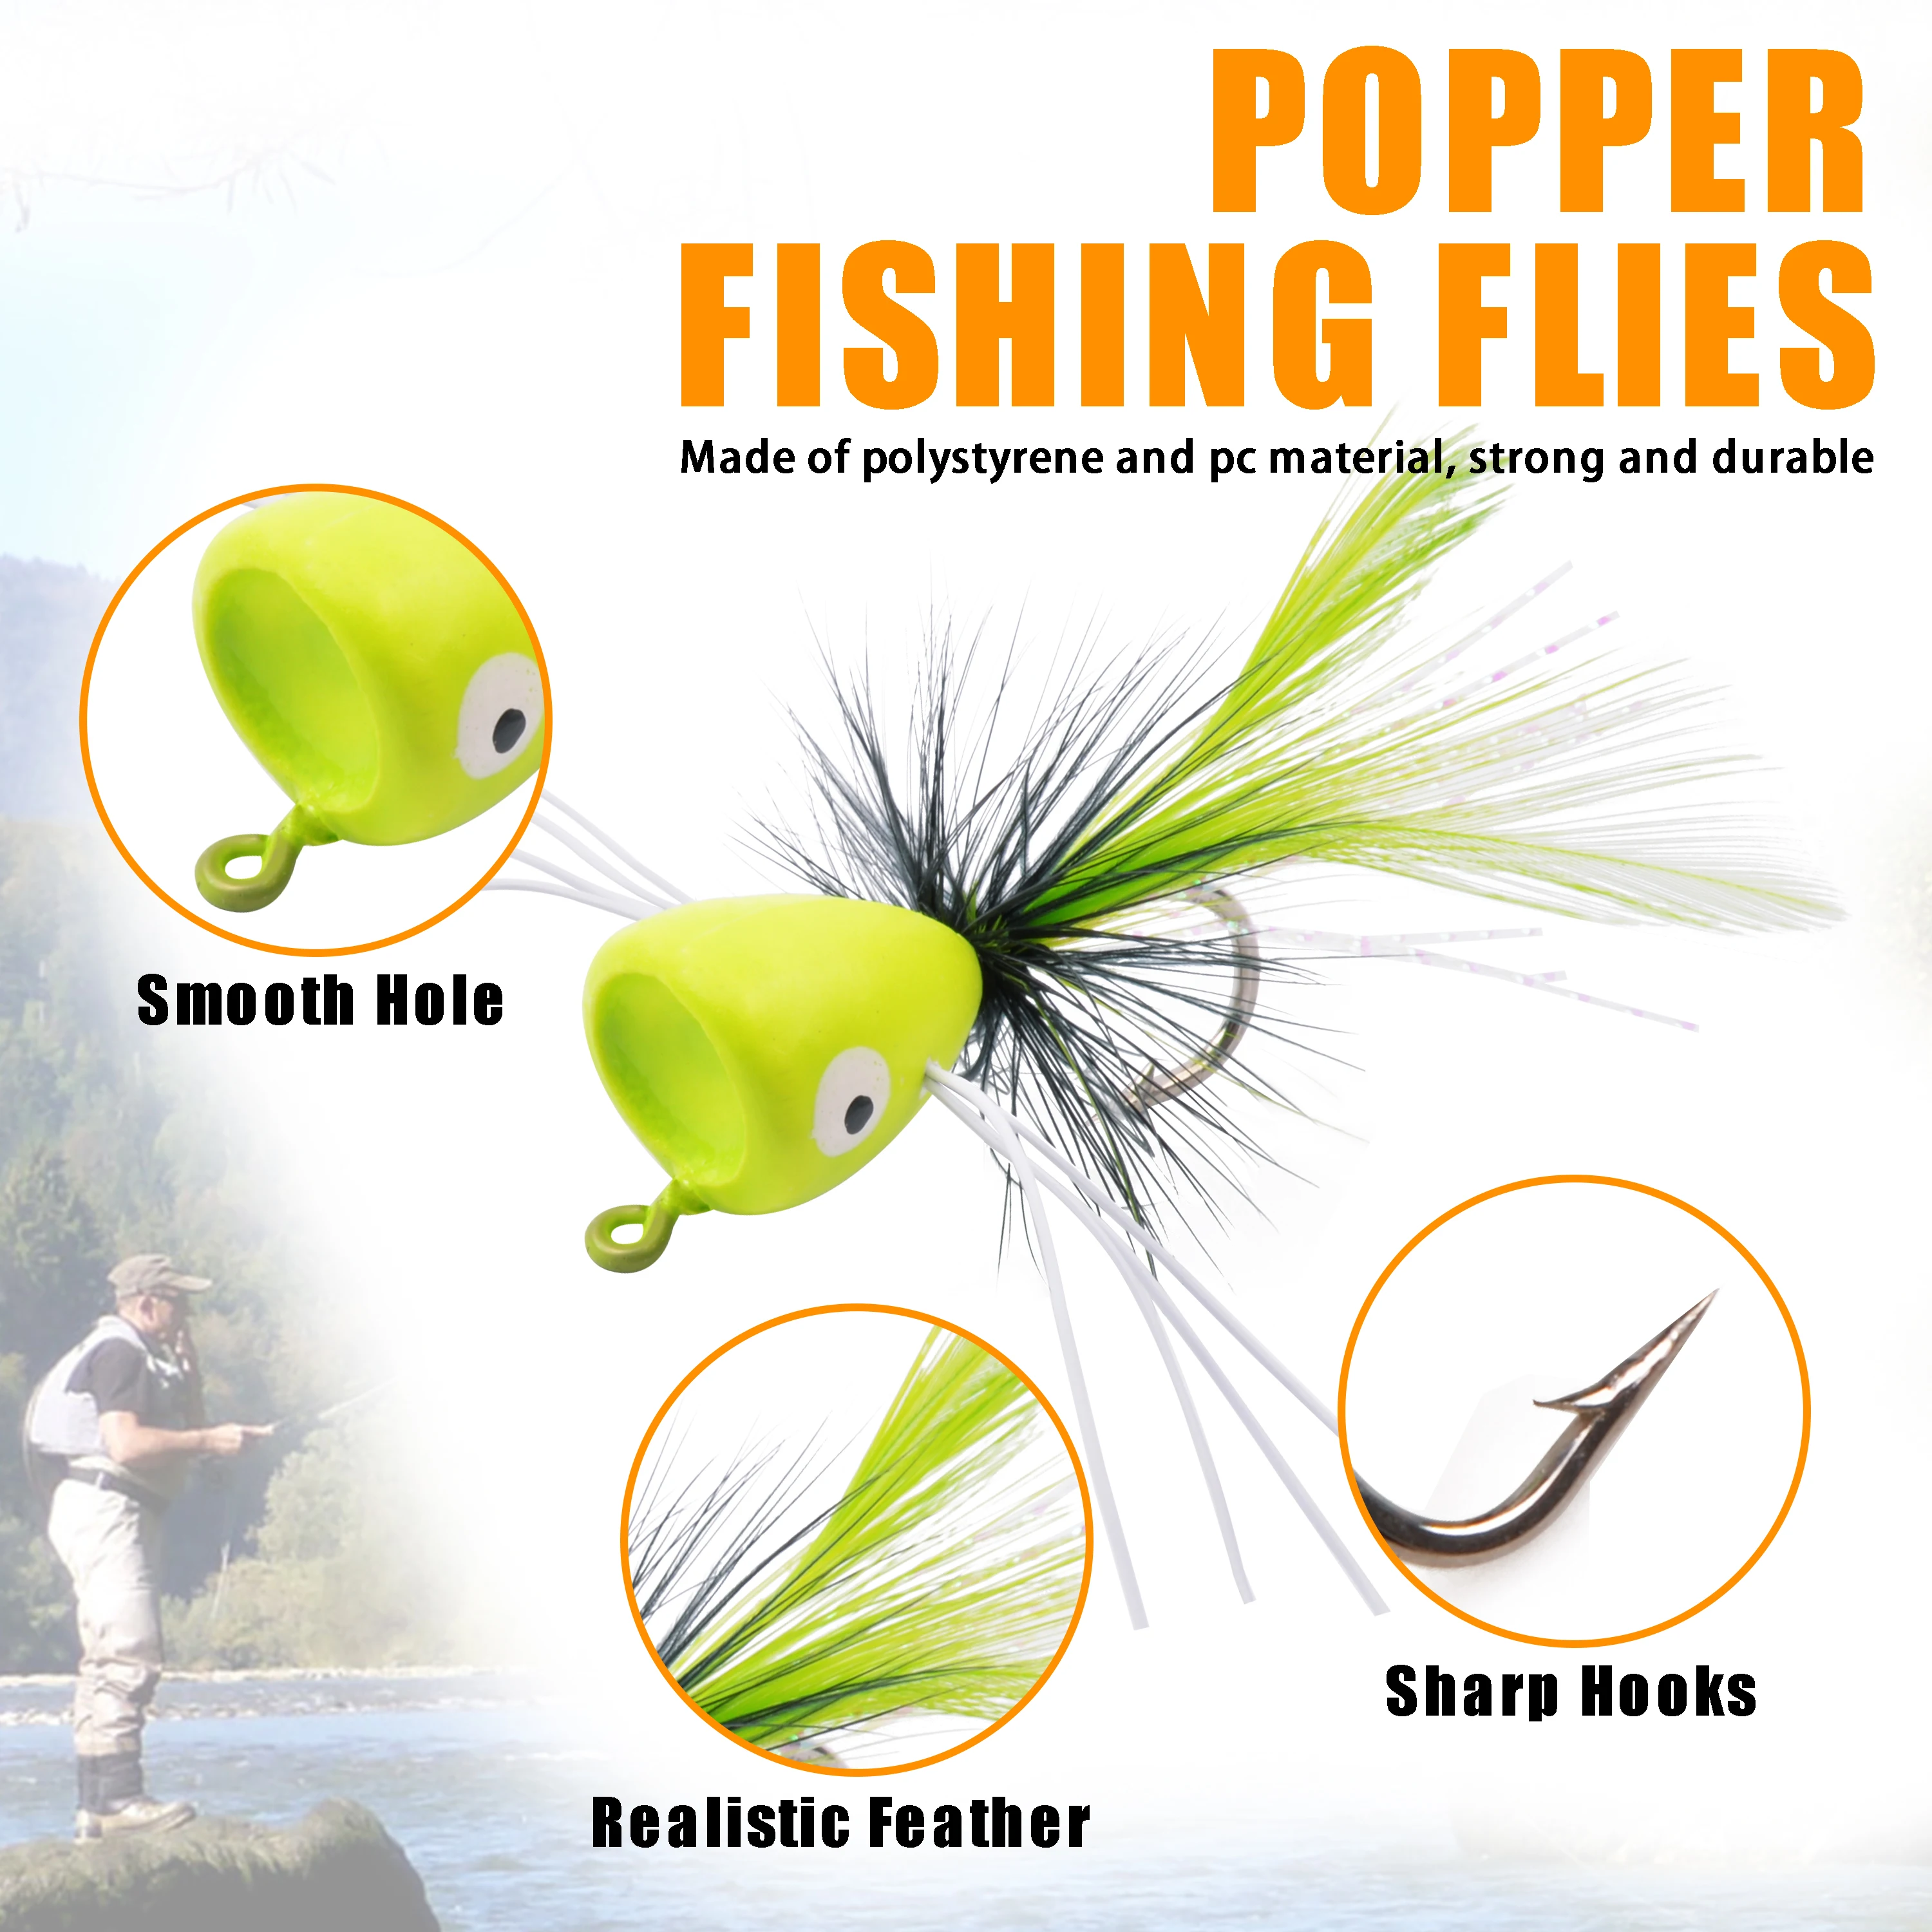 4PCS Foam Fly Fishing Poppers Topwater Floating Dry Flies Bugs Insect Lures  Streamer Artificial for Bass Trout Sunfish Salmon